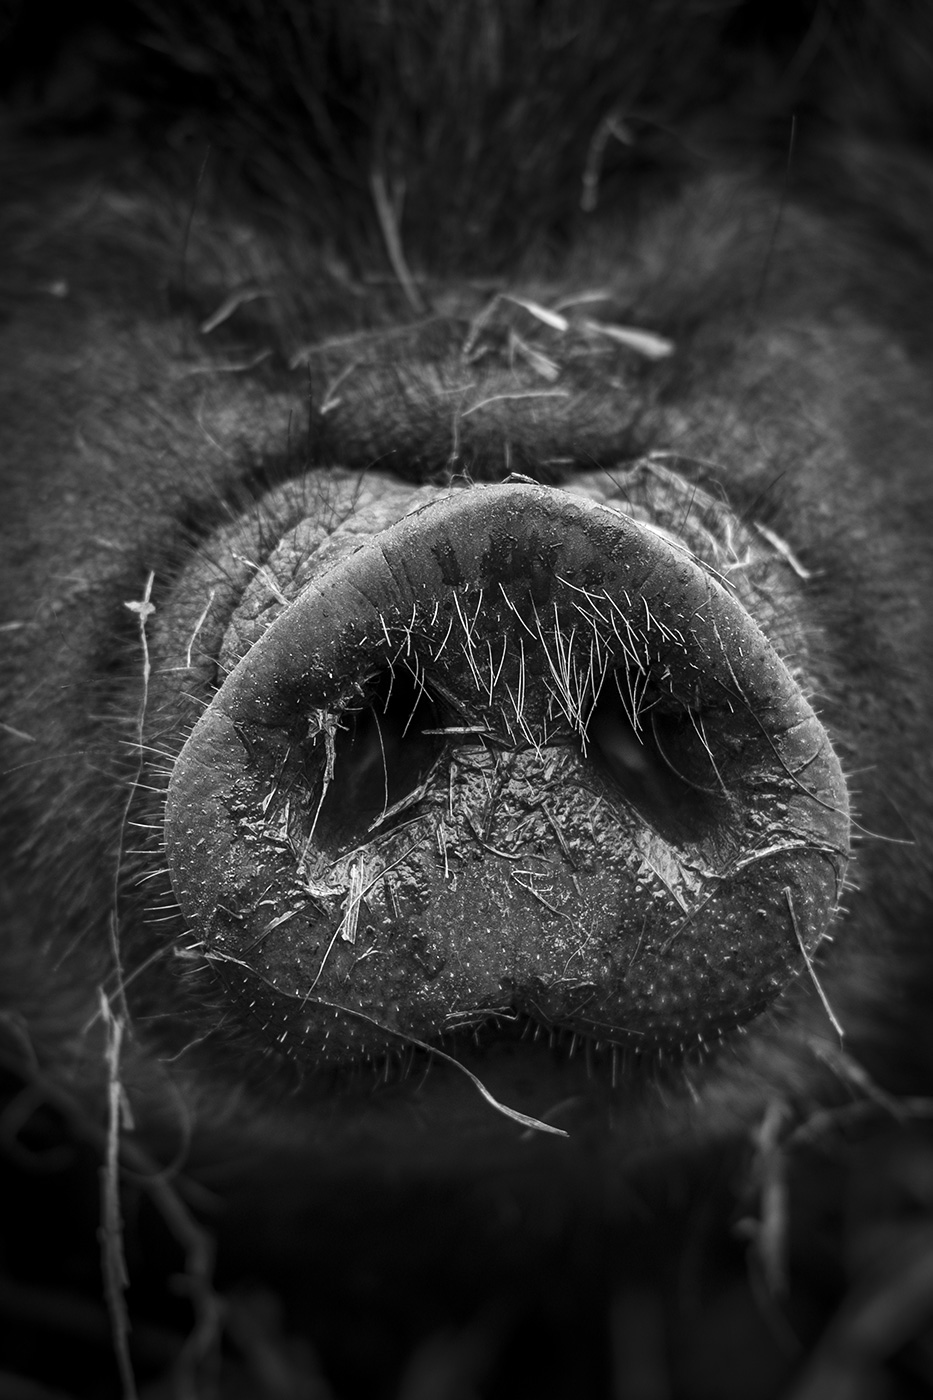 Whiskery pig snout closeup, black and white rural farm photograph, West Sussex UK © P. Maton 2018 eyeteeth.net